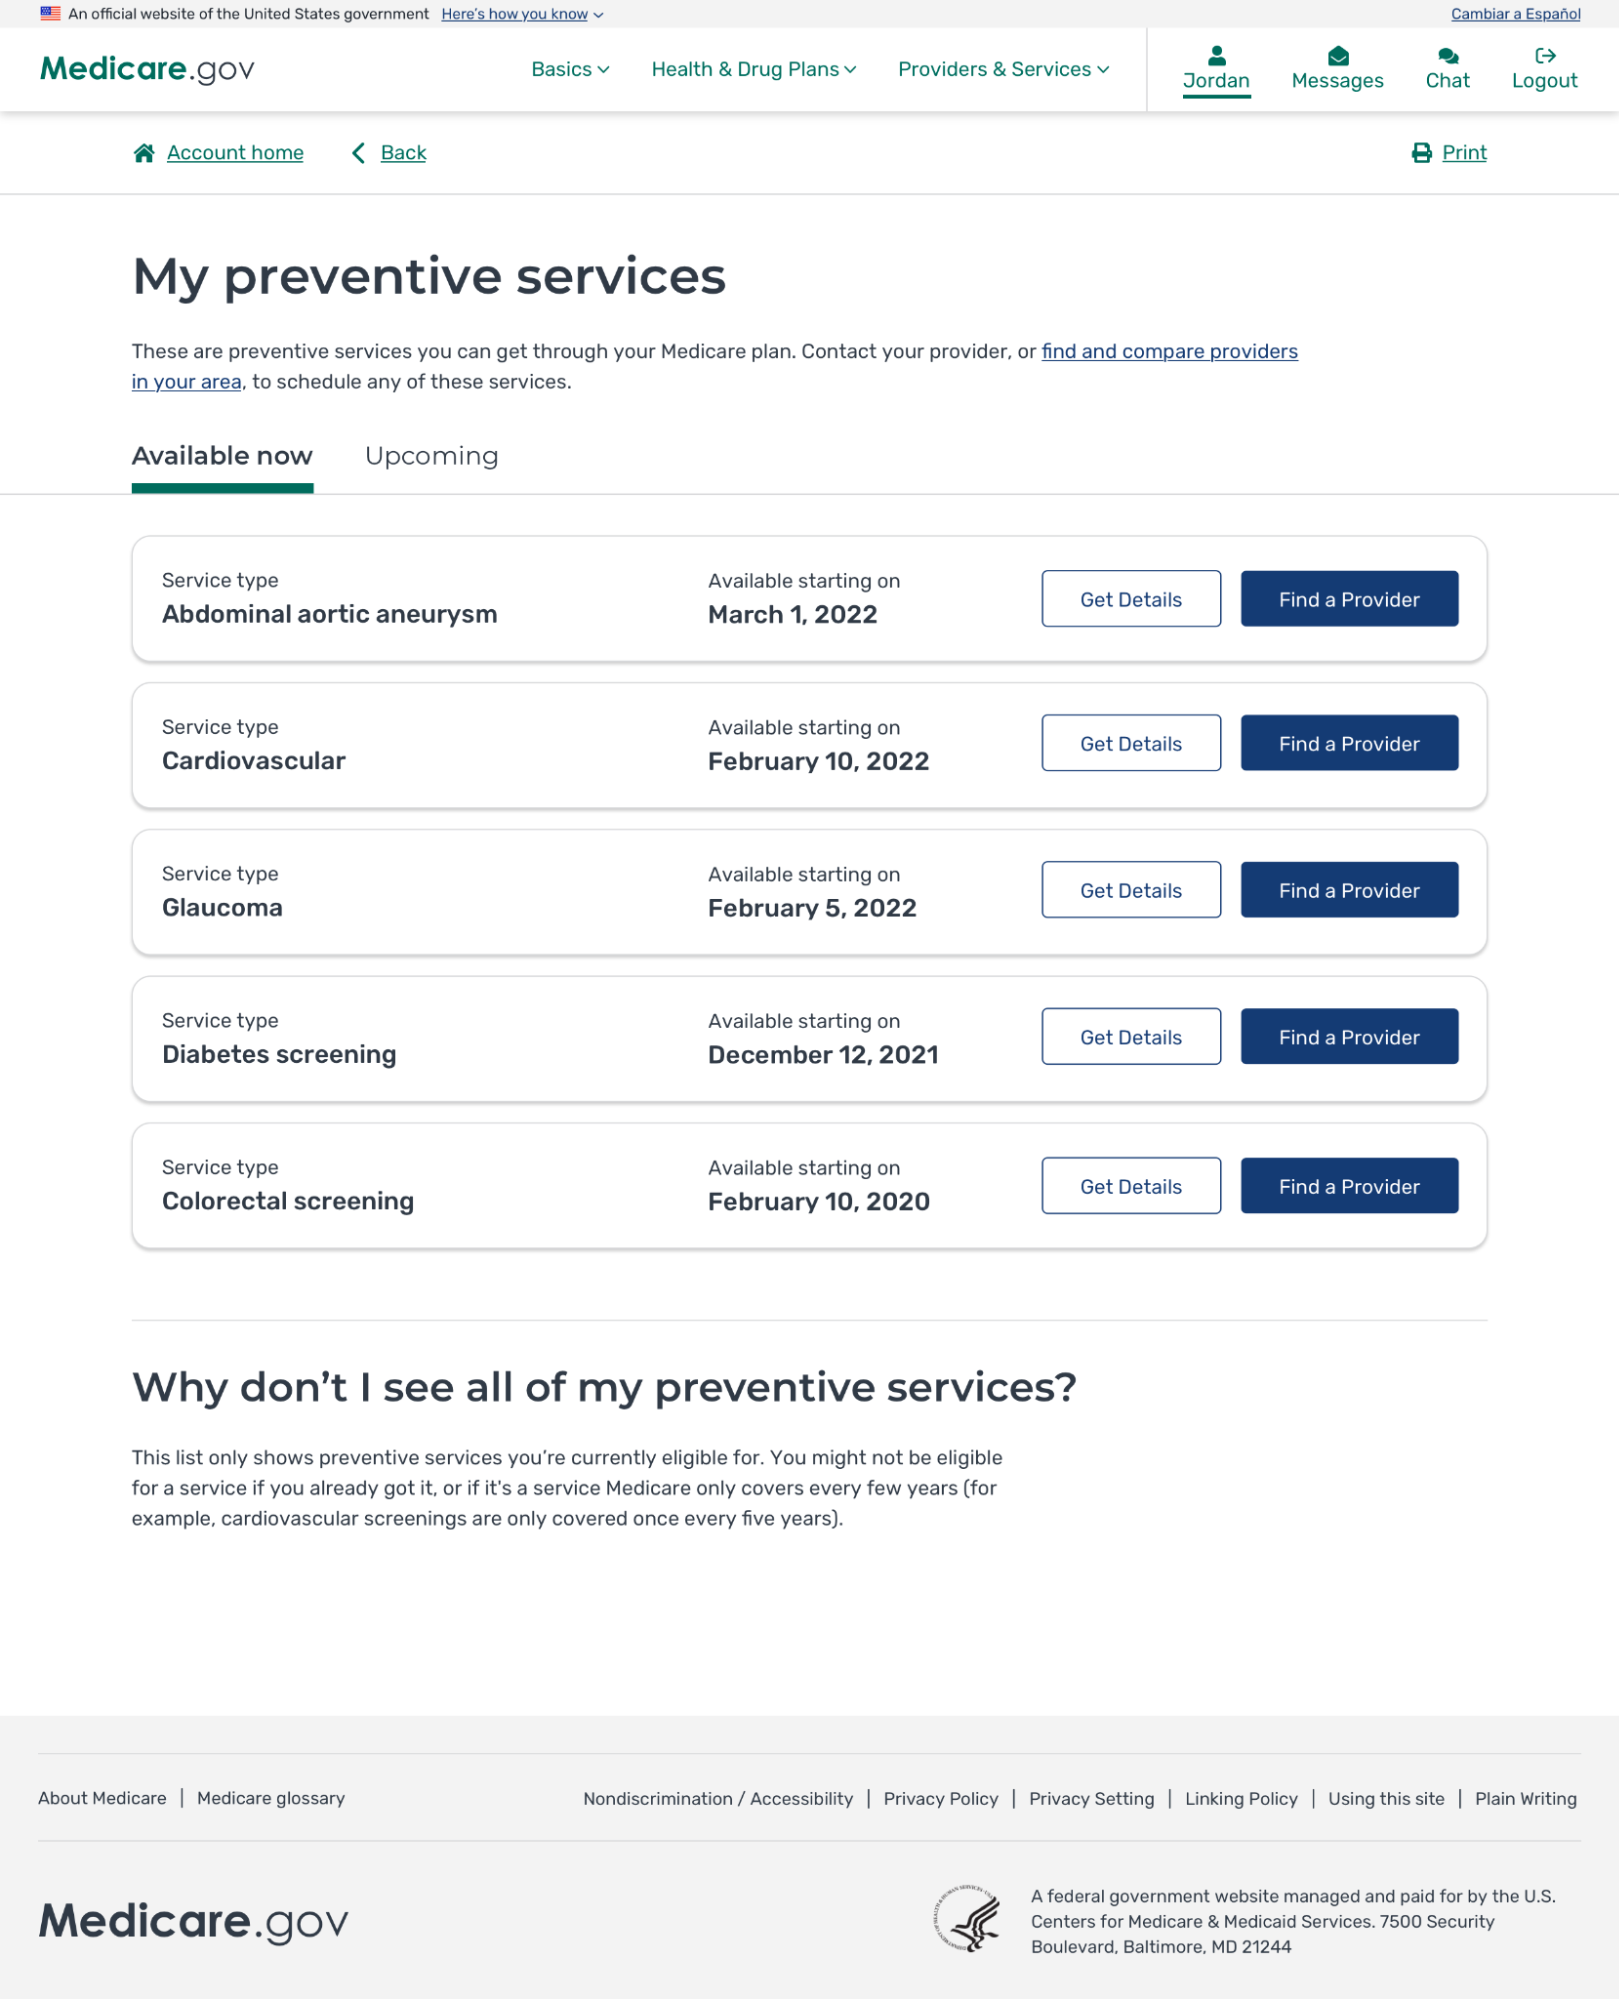 A screenshot of the My Preventive Services page with buttons mapping to specific preventive services.